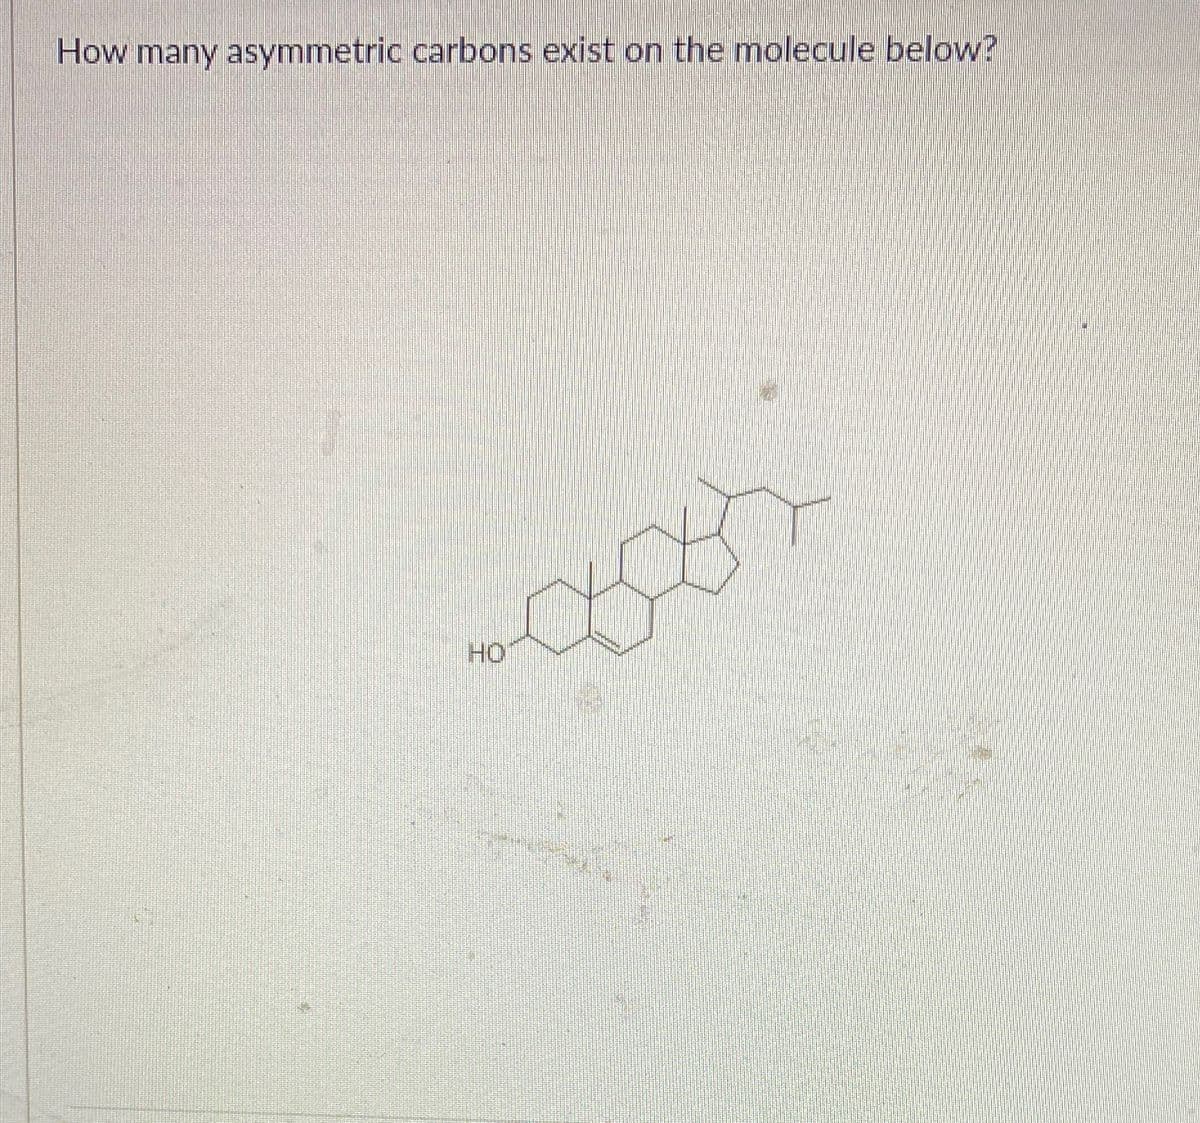 How many asymmetric carbons exist on the molecule below?
HO
